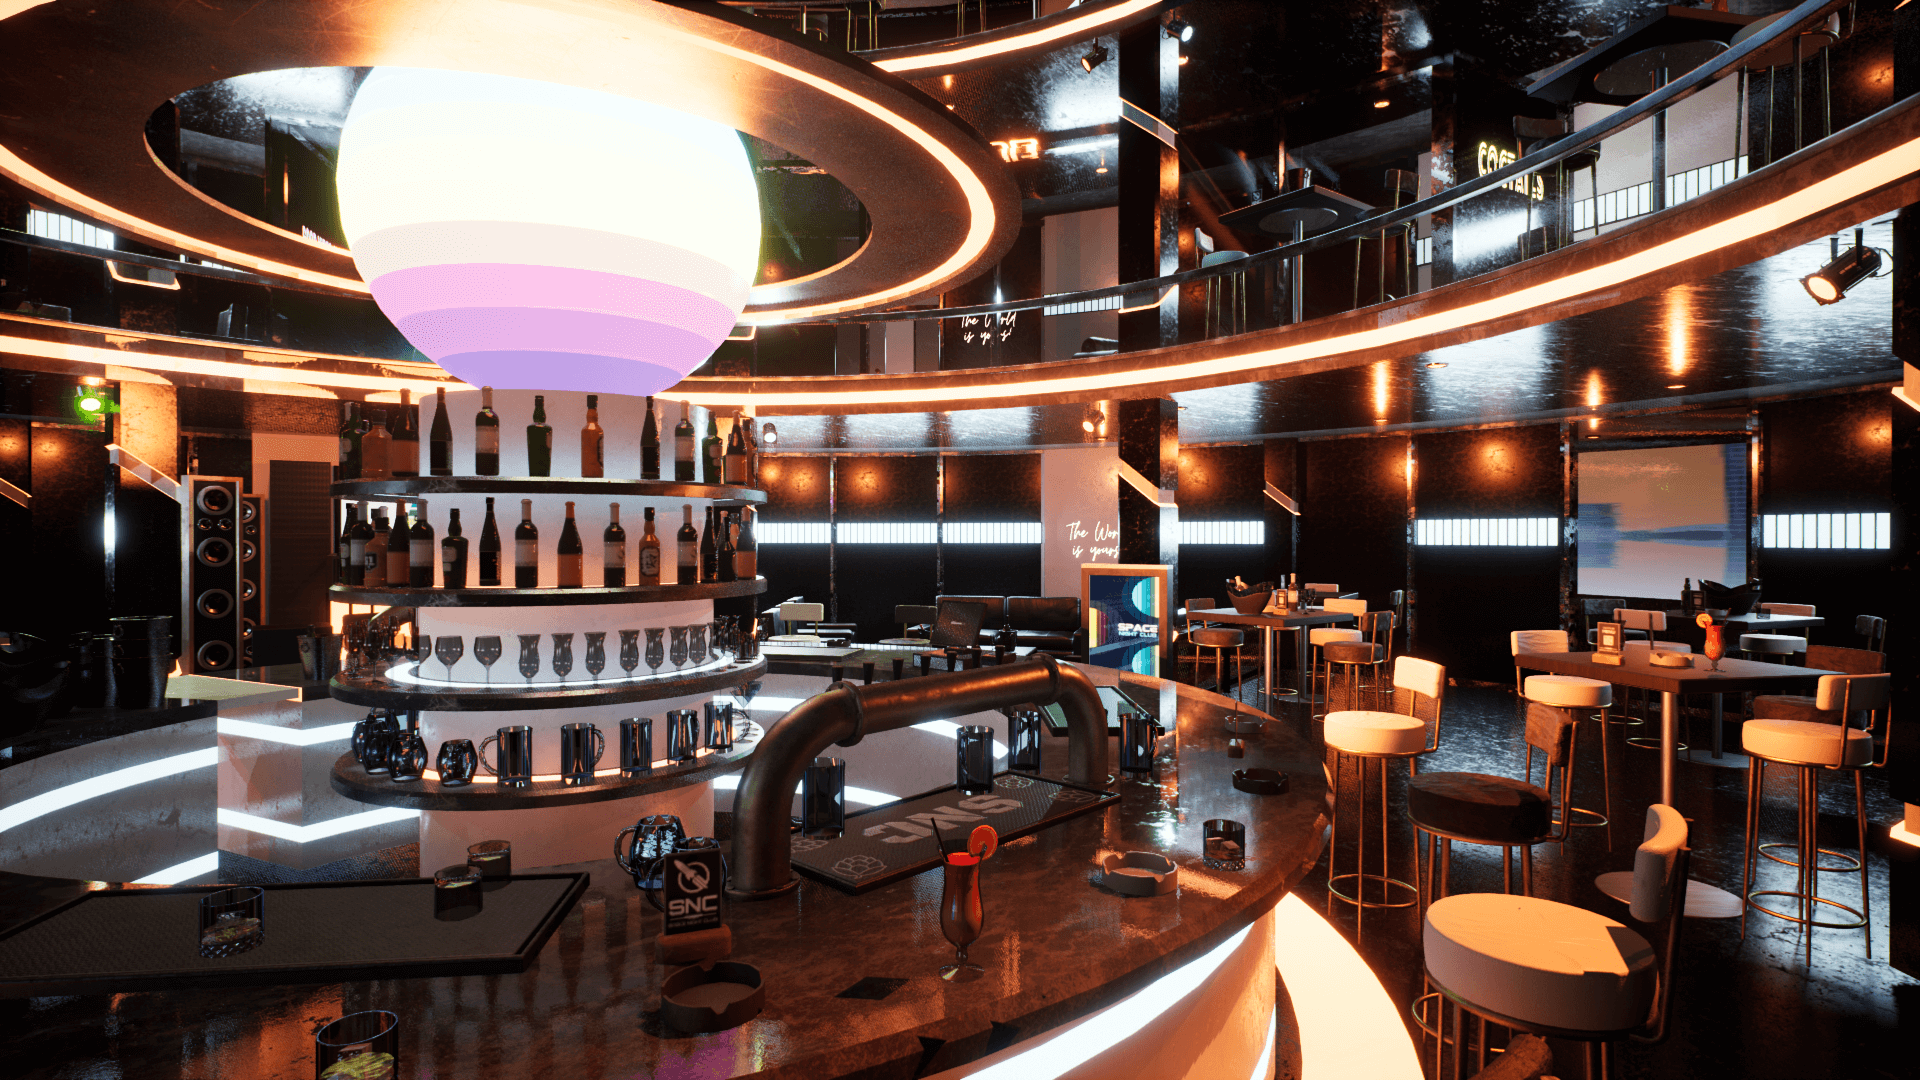 An image showing the Space Night Club asset pack, created with Unreal Engine